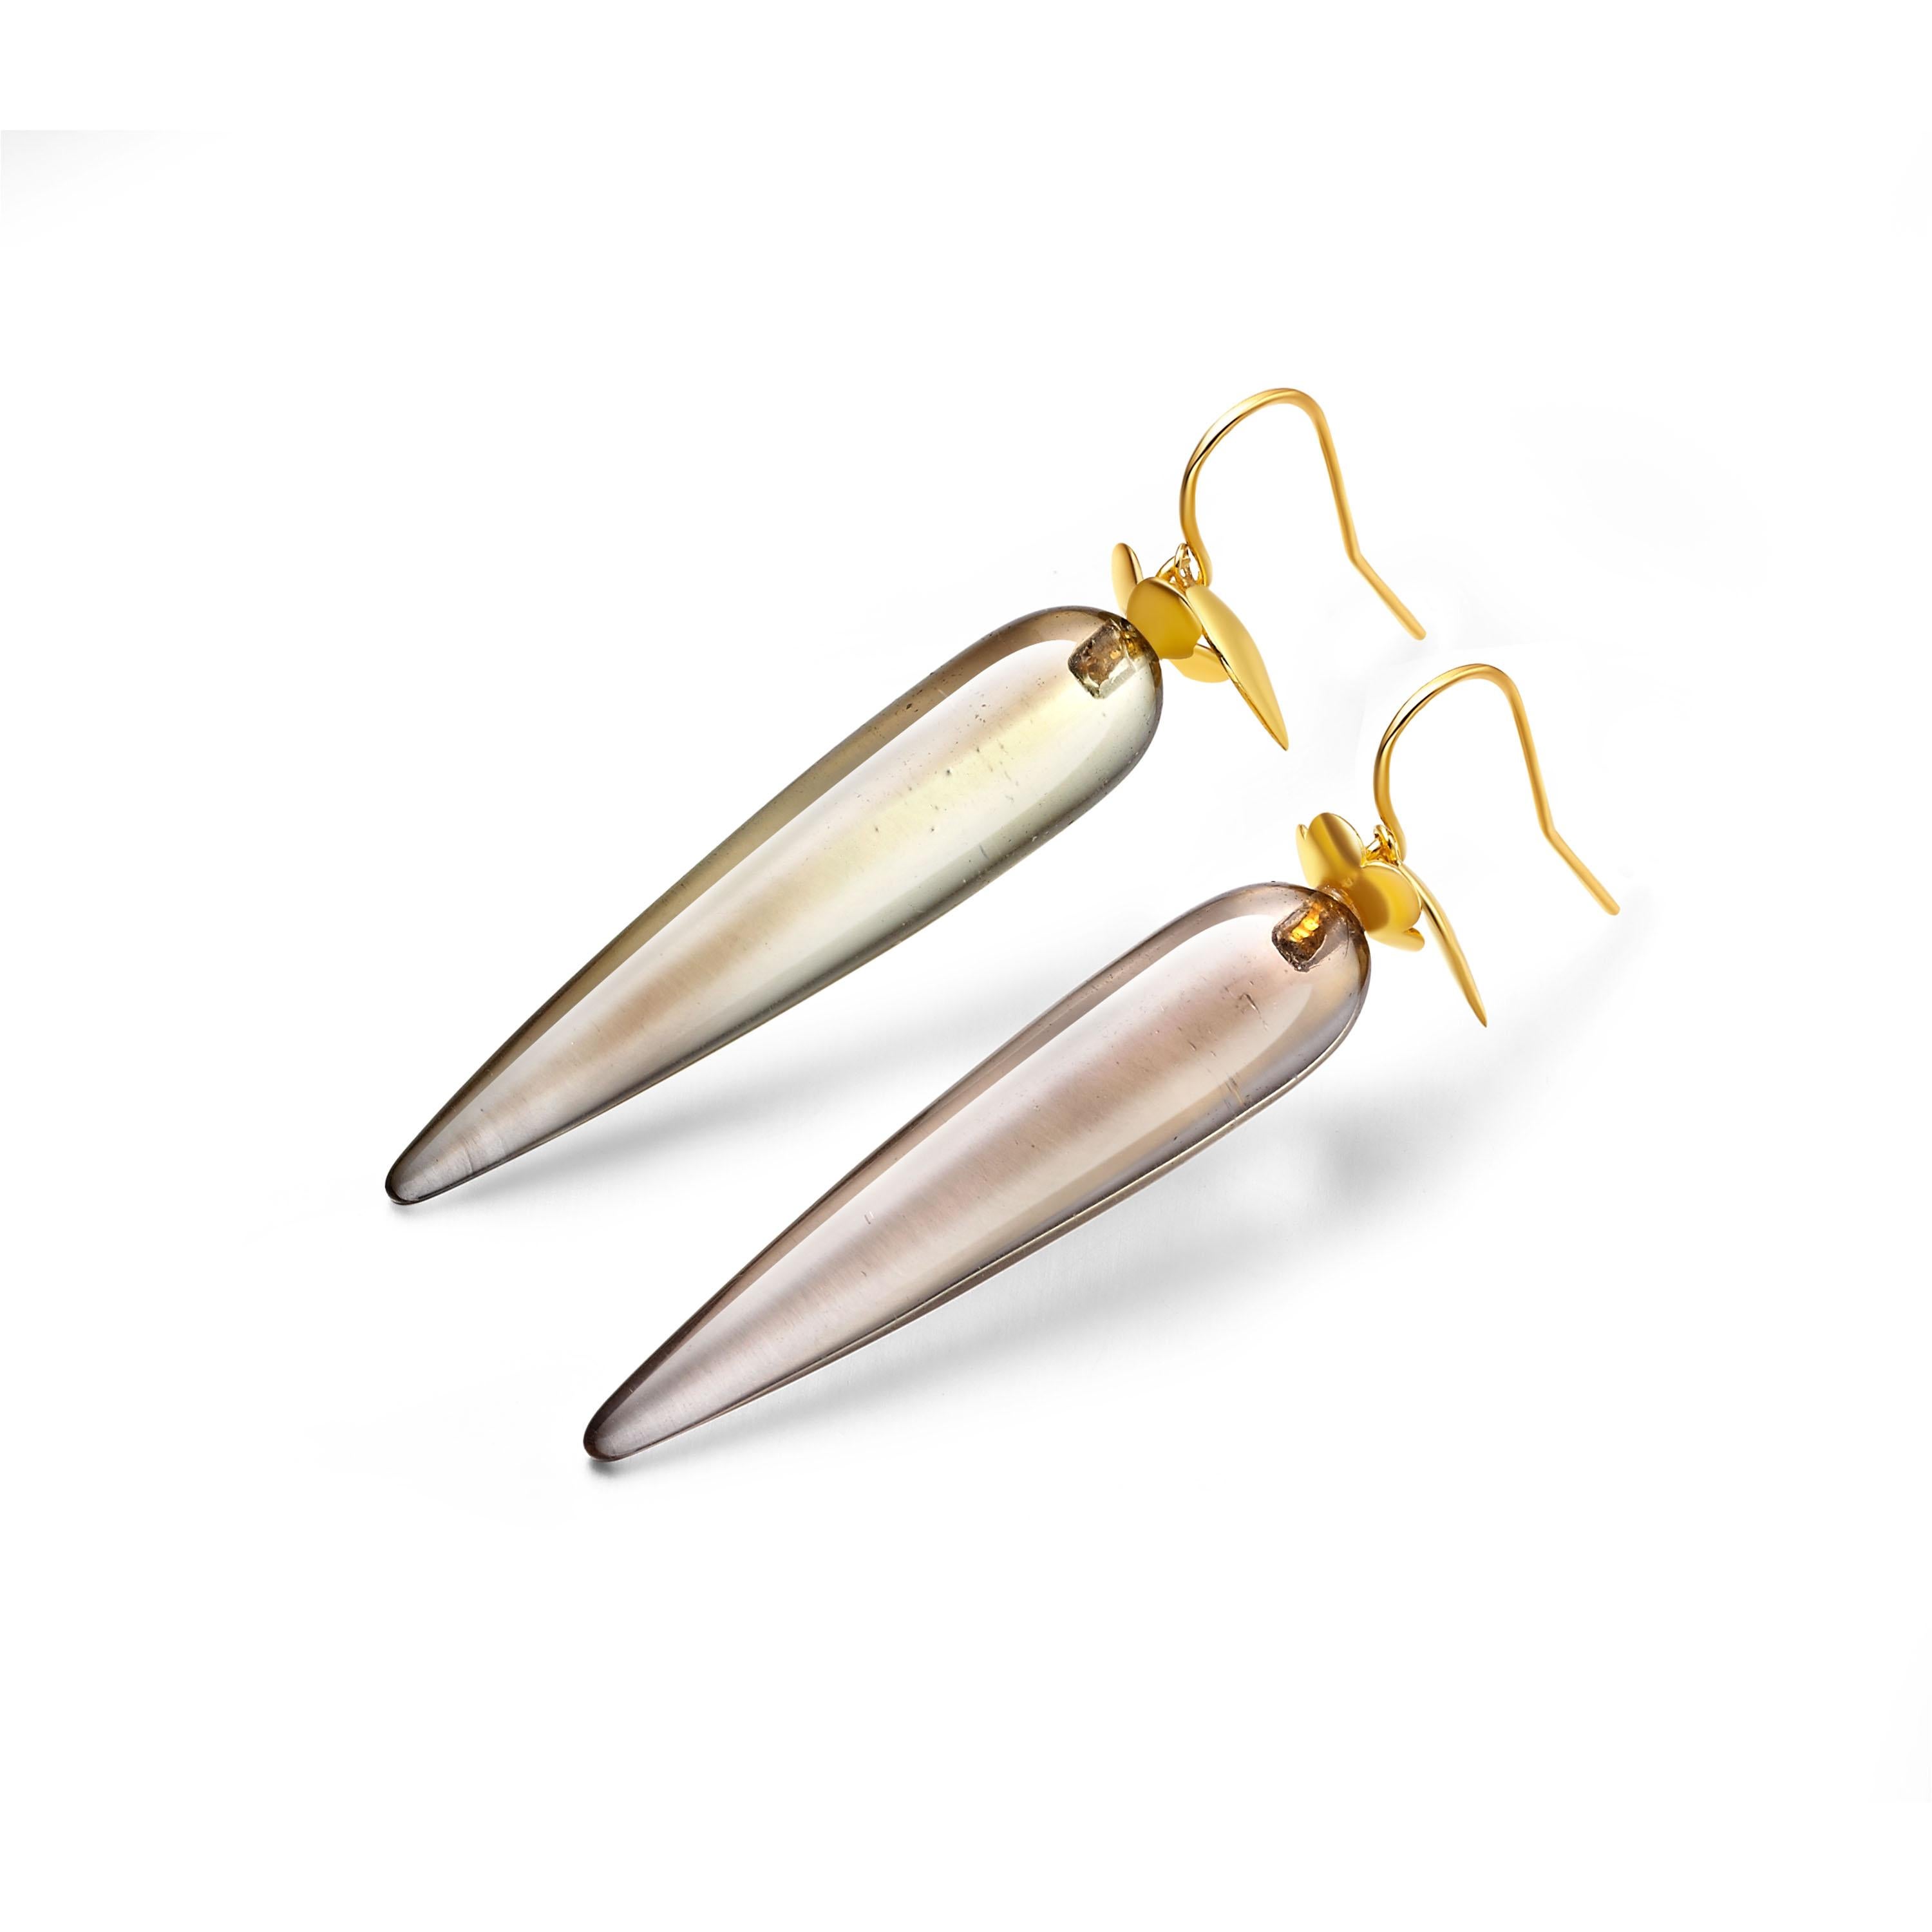 Sophisticated drop earrings featuring teardrops of “stone of power” smoky quartz adorned with delicate petals of 18ct gold plate on sterling silver.

Due to the nature of stones, please bear in mind that the clarity of the smoky quartz may differ